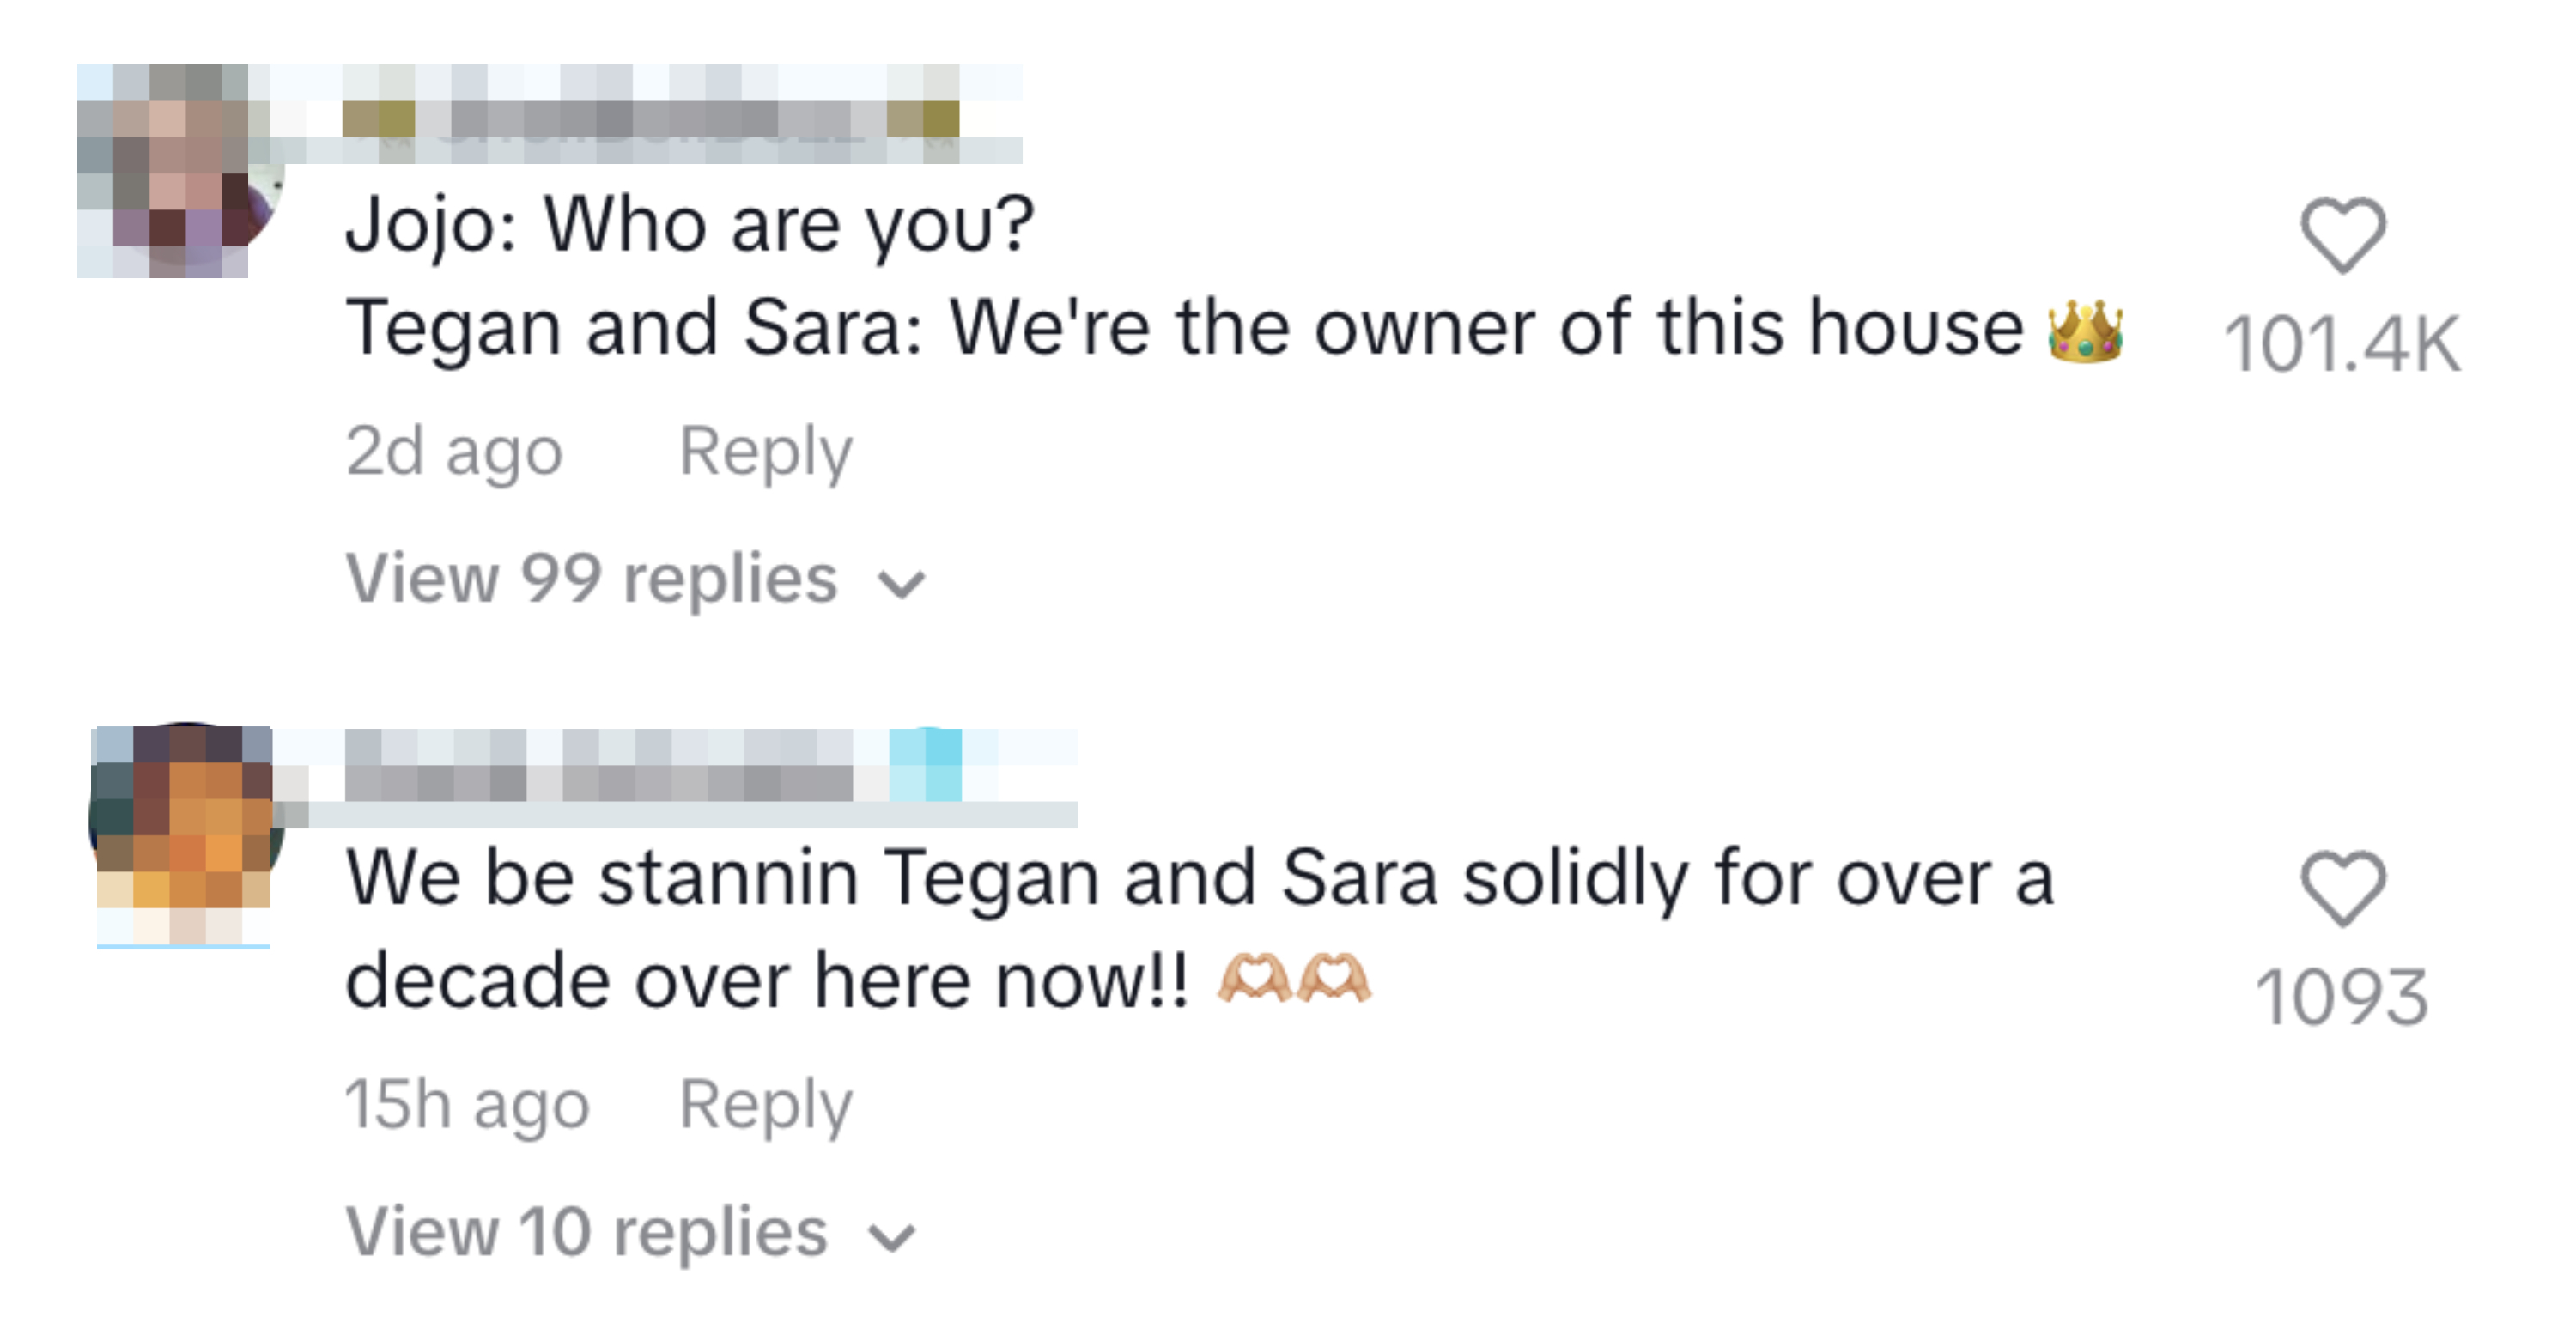 Comments under a post with users expressing admiration for Tegan and Sara